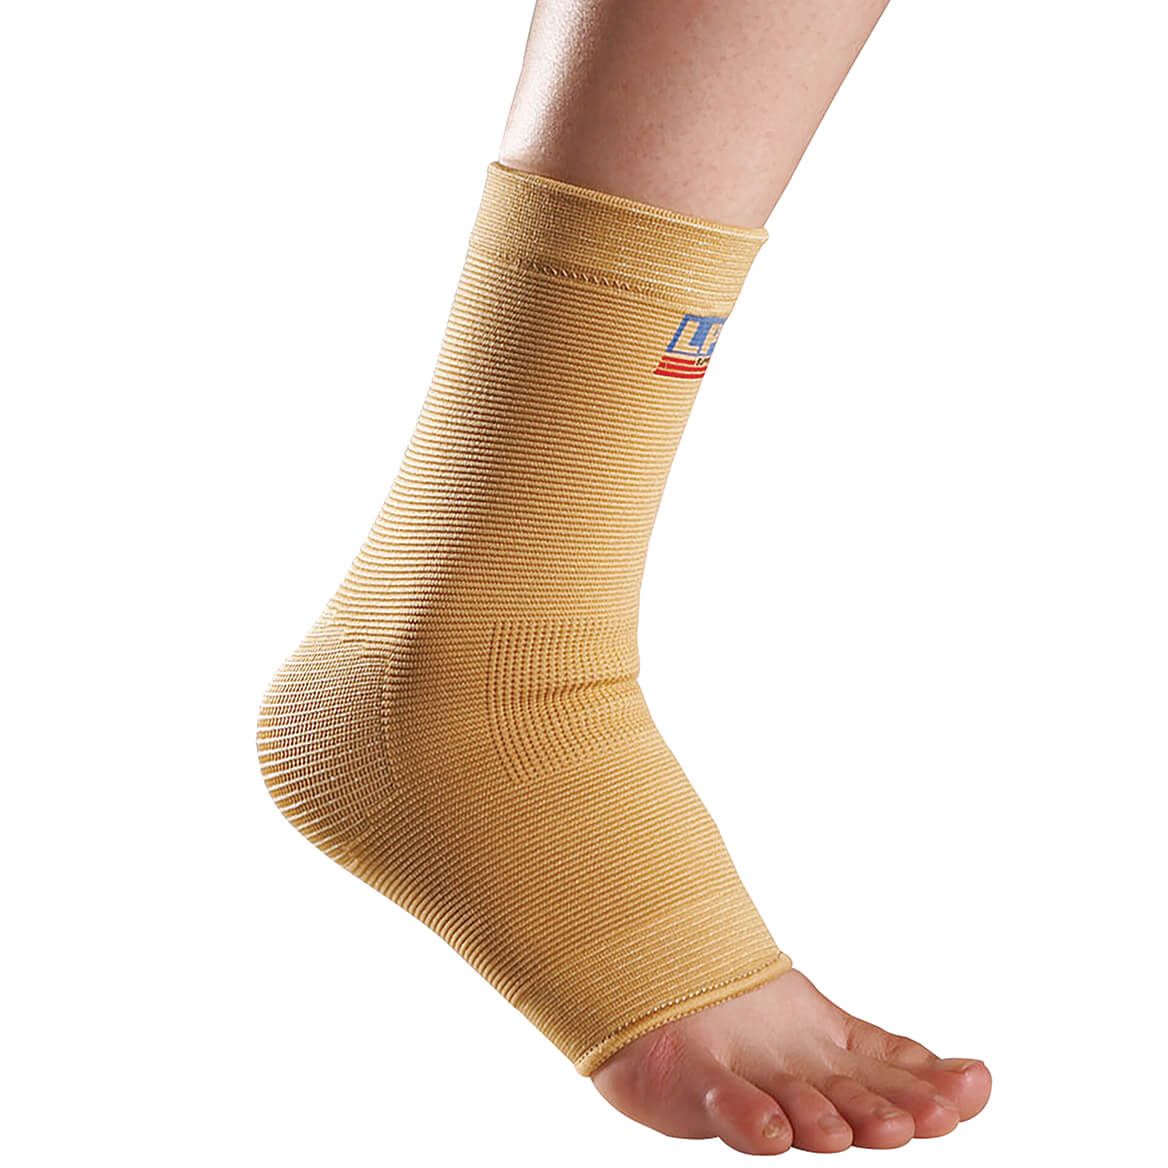 Elastic Ankle Support - Ankle Support Brace - Miles Kimball